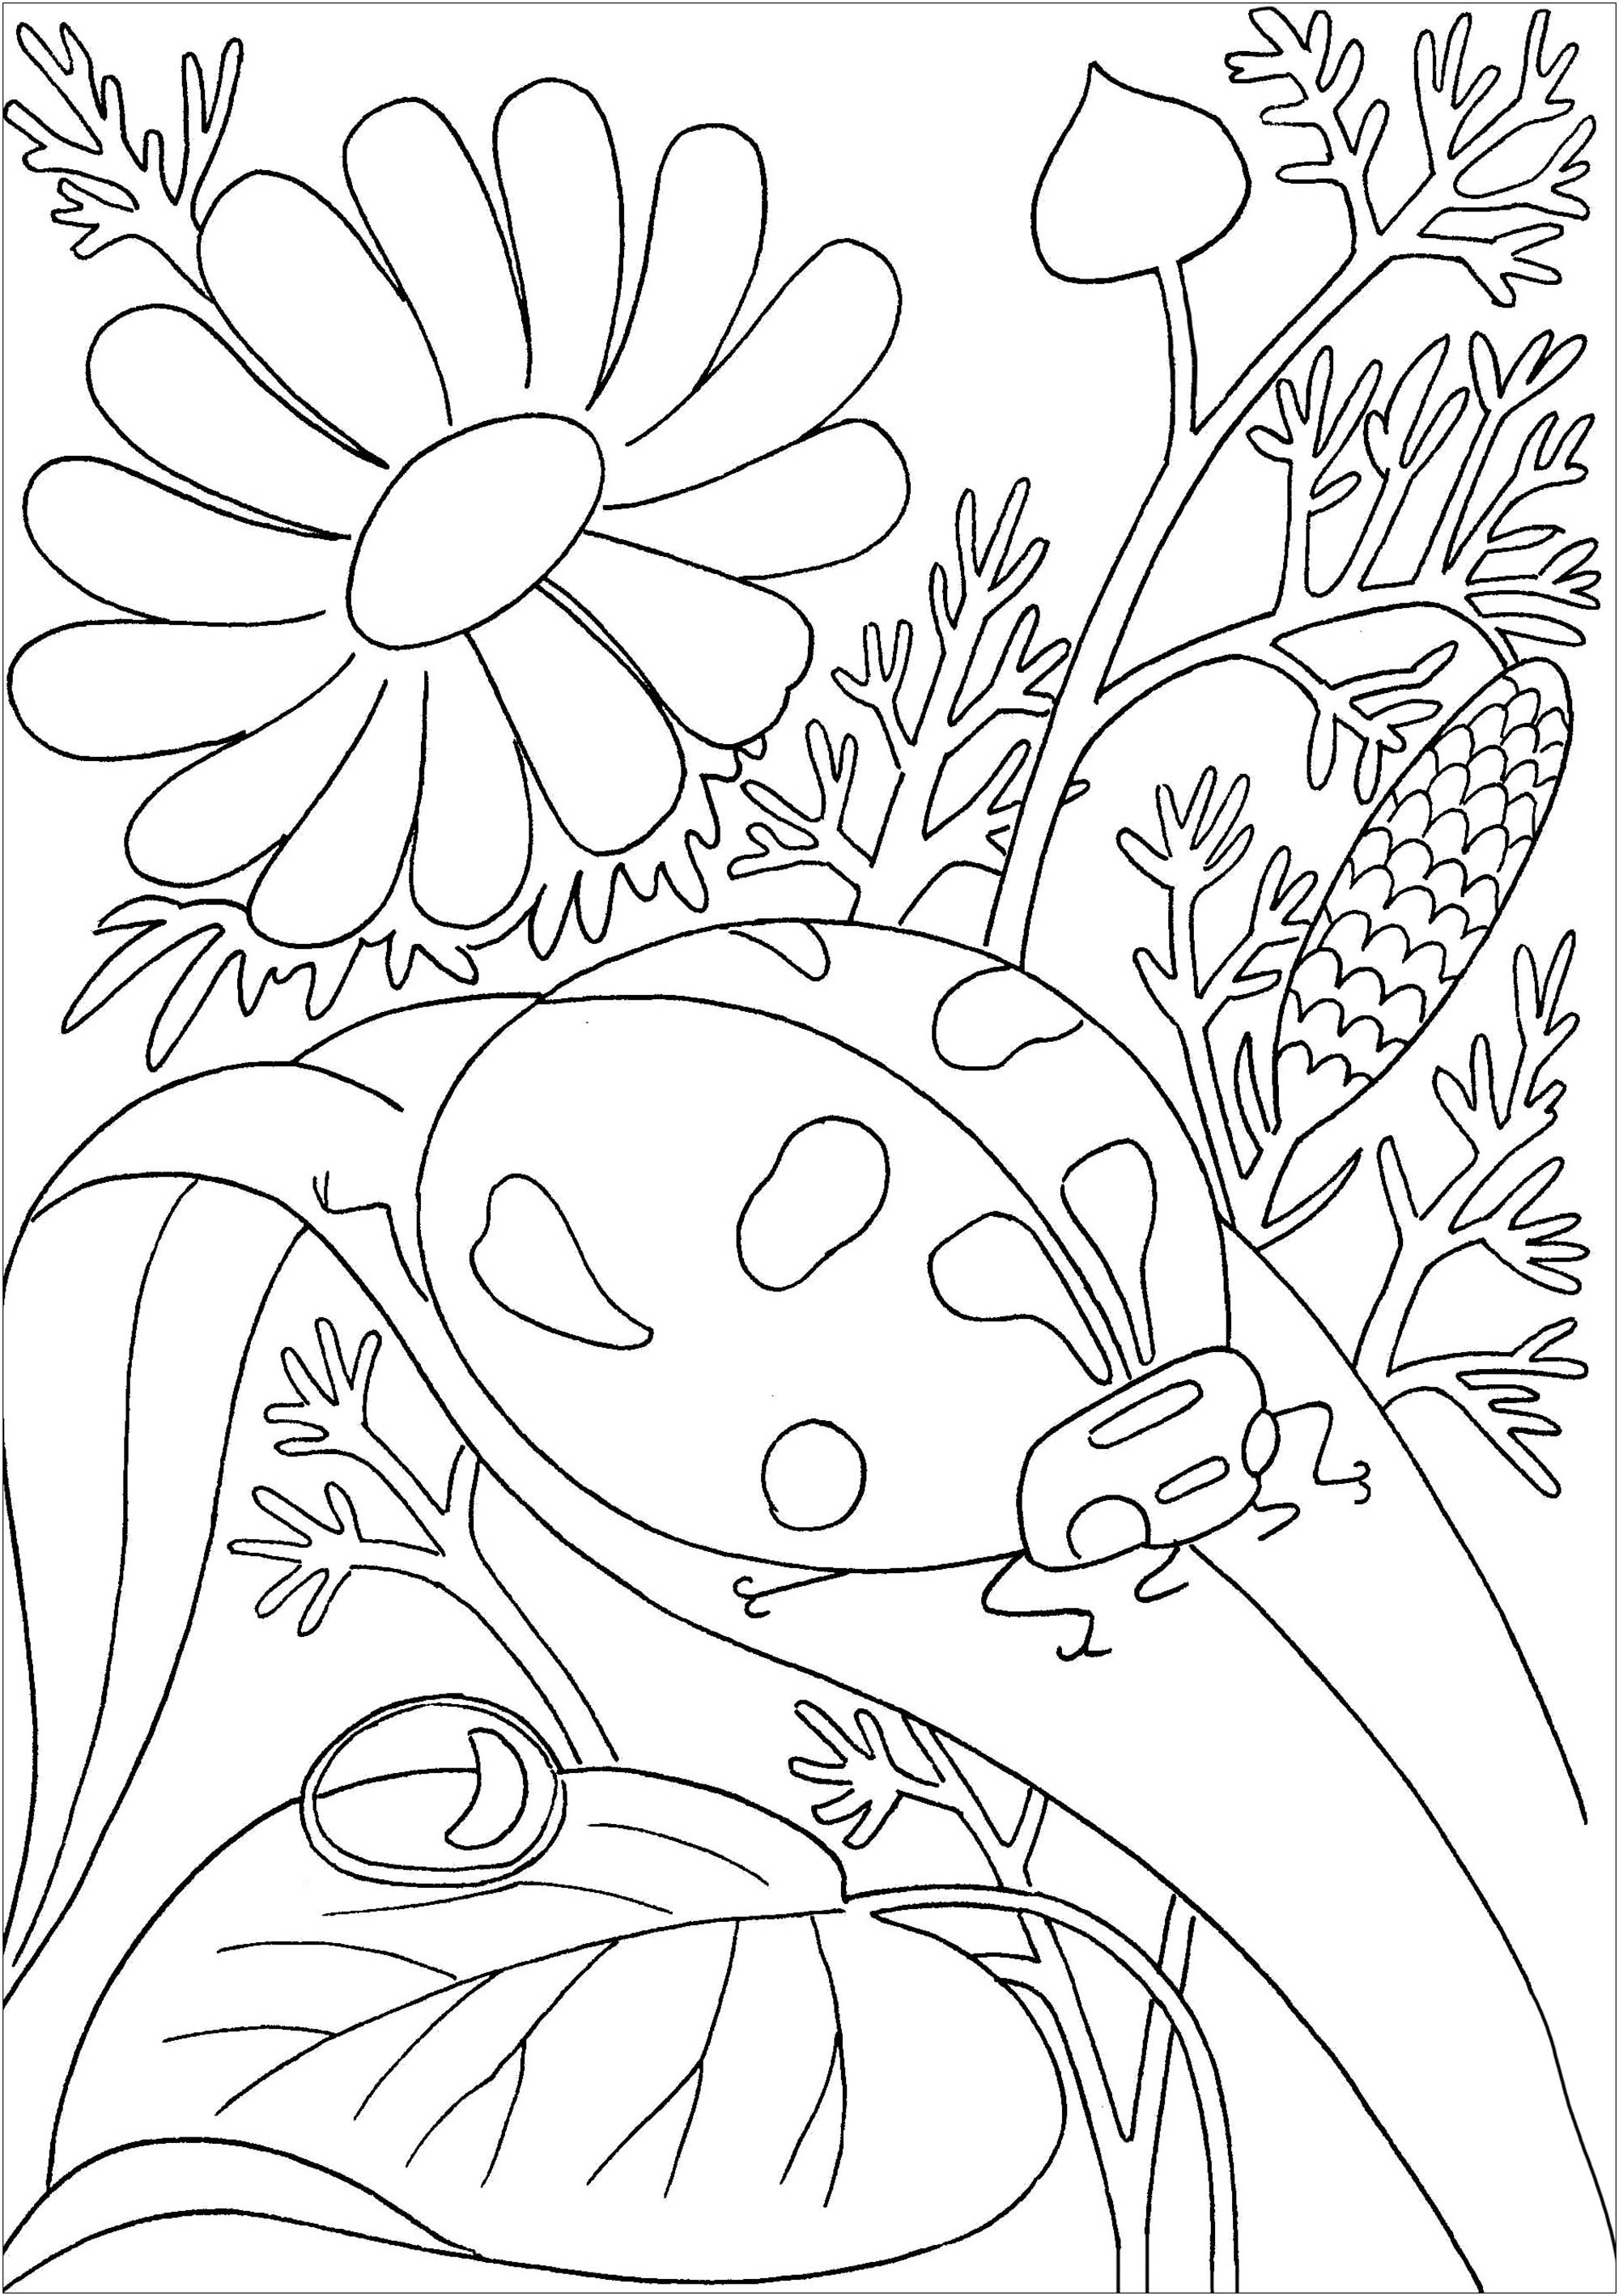 Ladybug on a leave Butterflies & insects Adult Coloring Pages